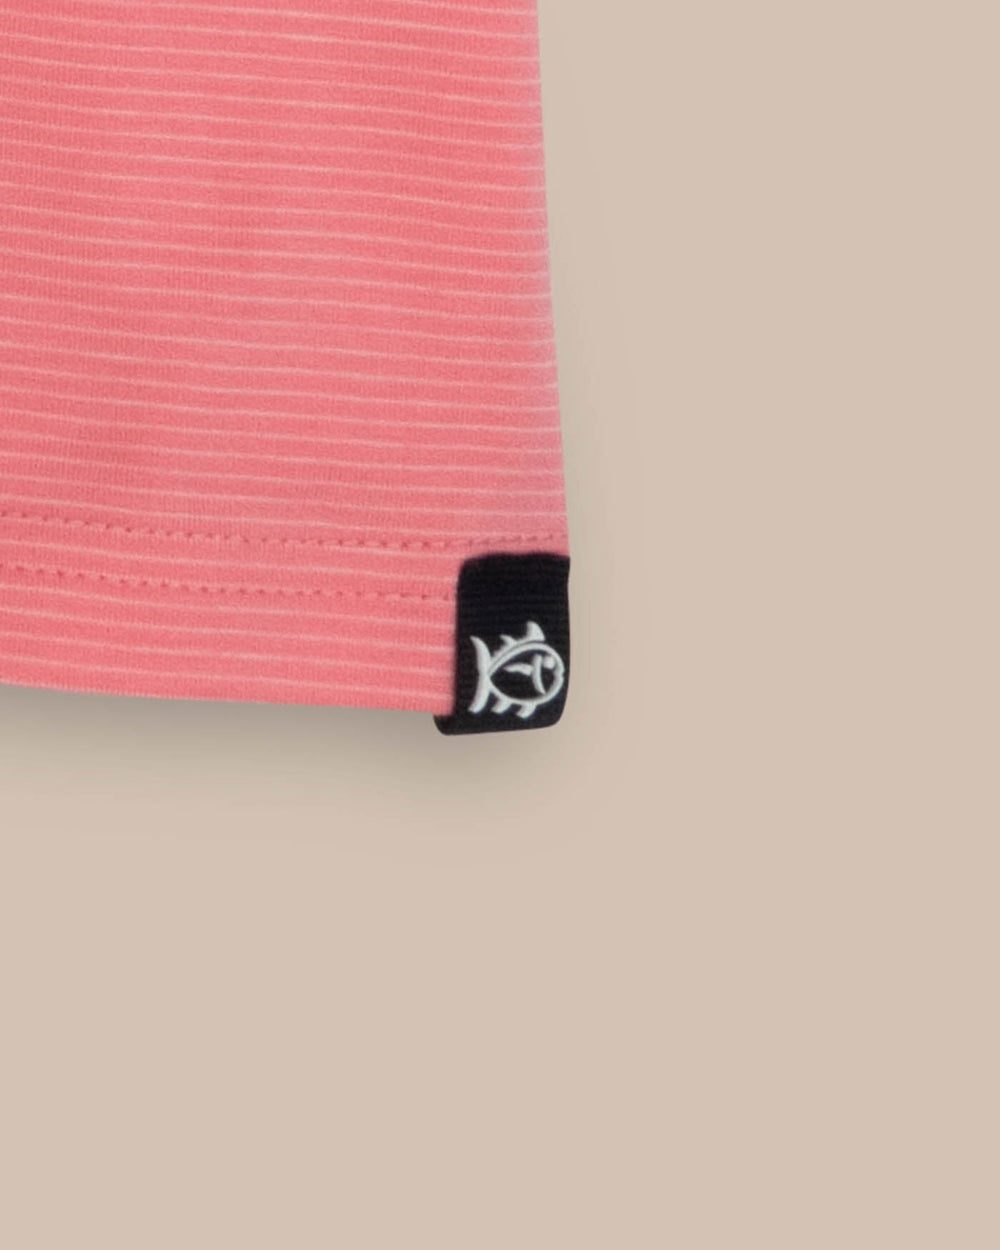 The detail view of the Southern Tide The Seaport Davenport Stripe Tee by Southern Tide - Geranium Pink